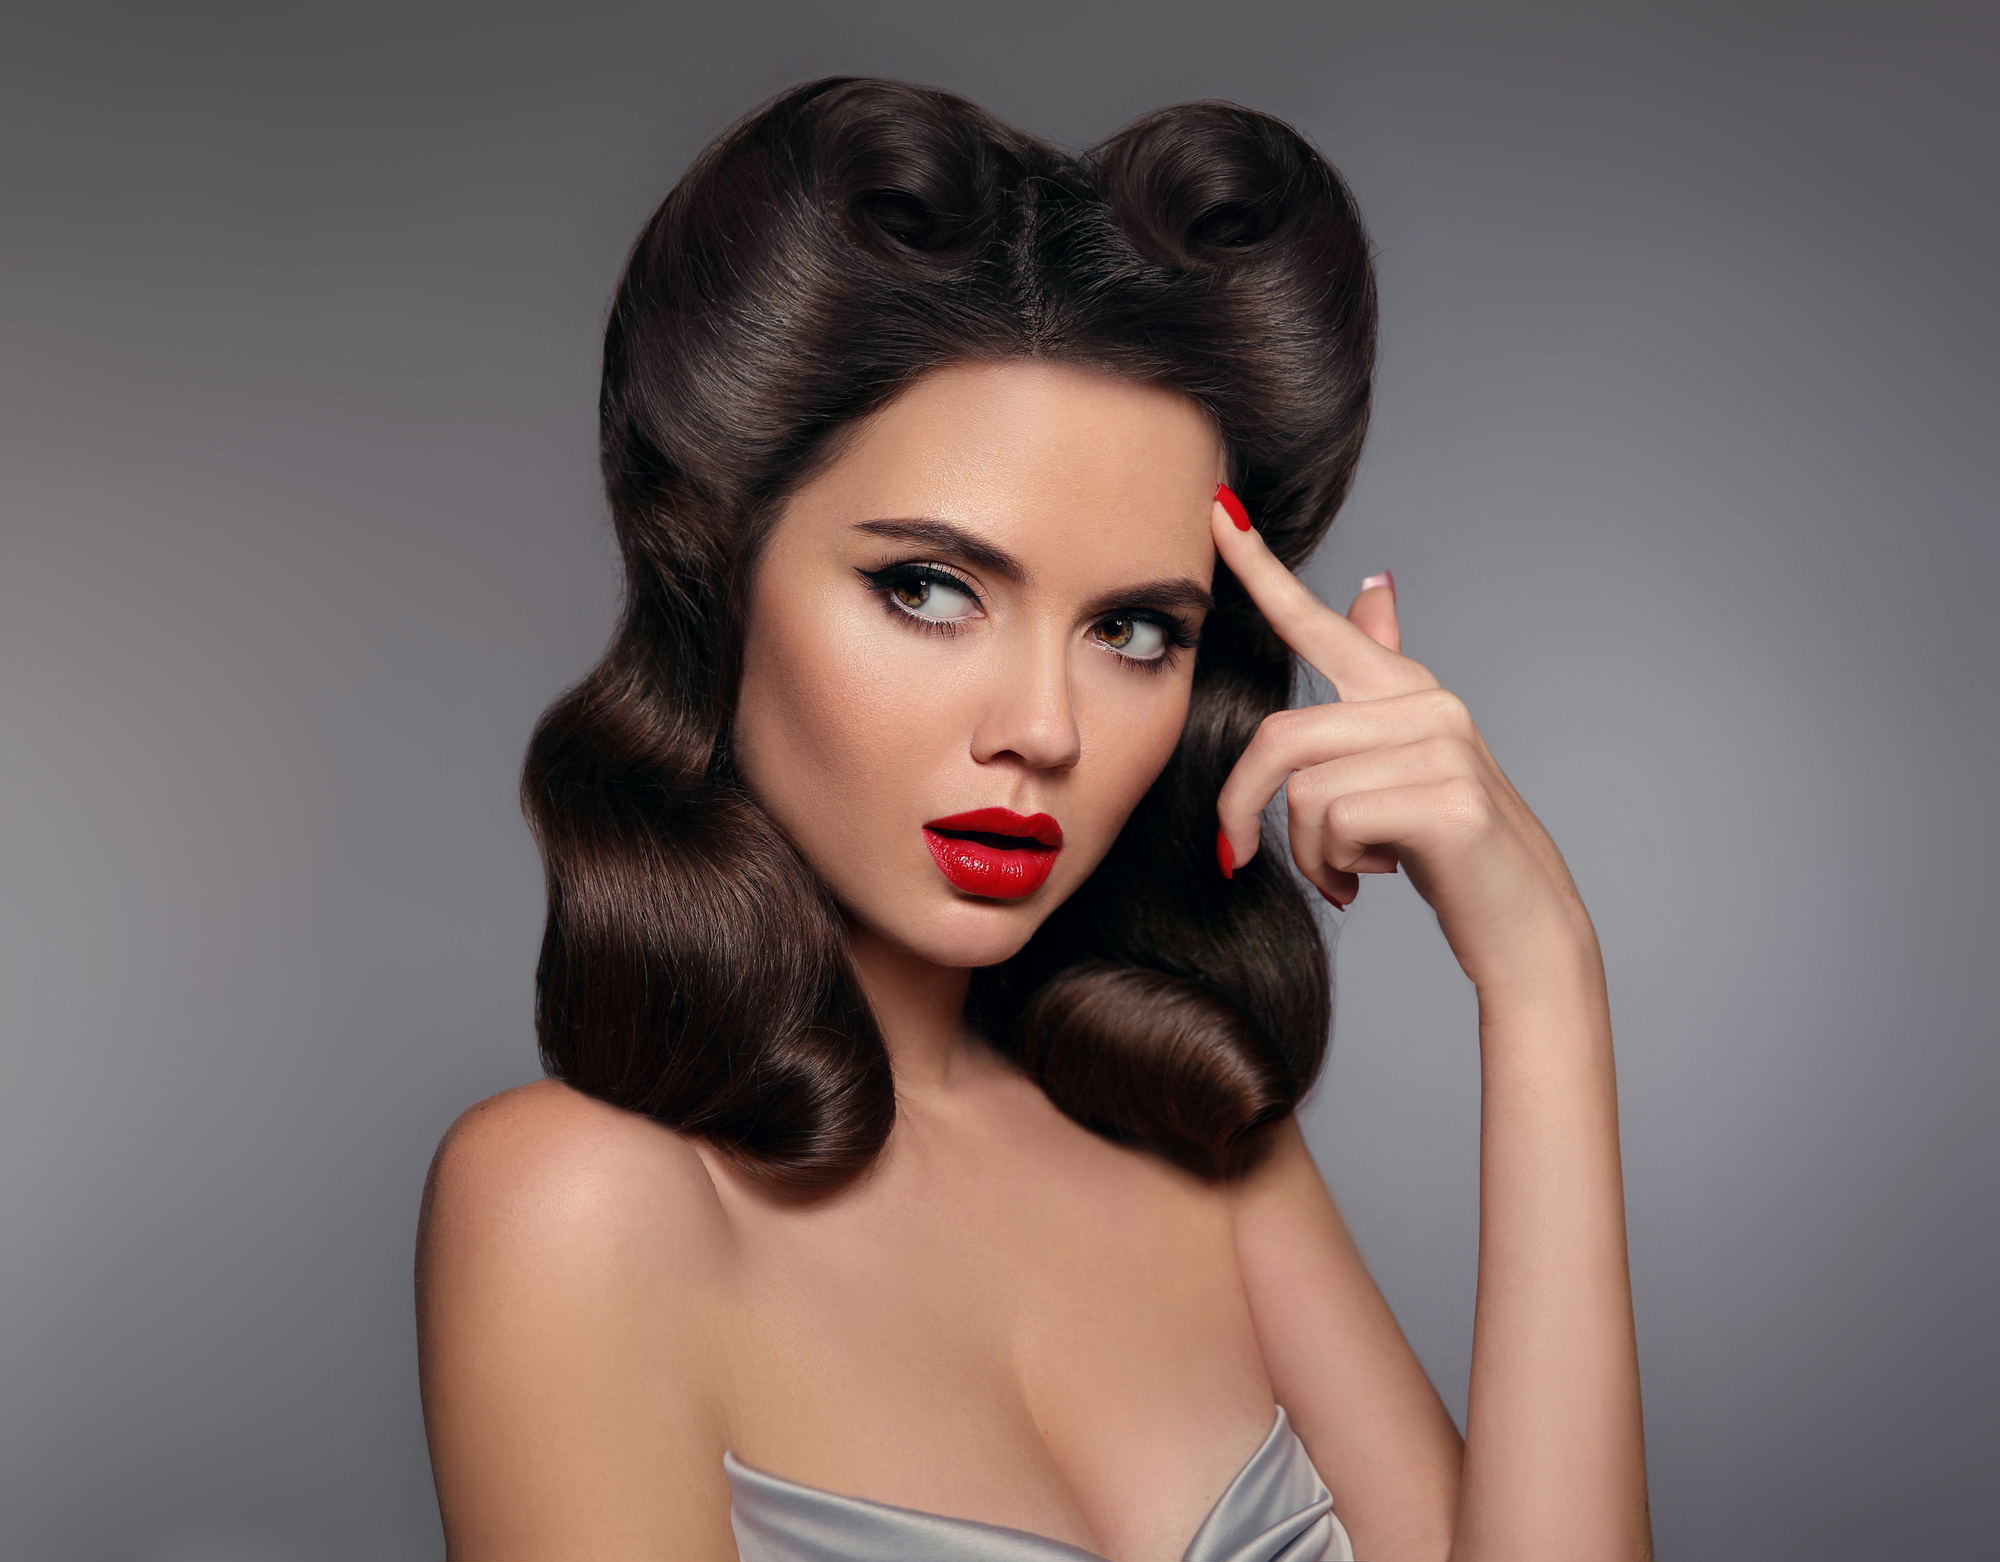 Pin up girl with red lips makeup and retro curls hair style. Retro woman looking to the side holds a finger near the head. Expressive facial expressions. High fashion photo.